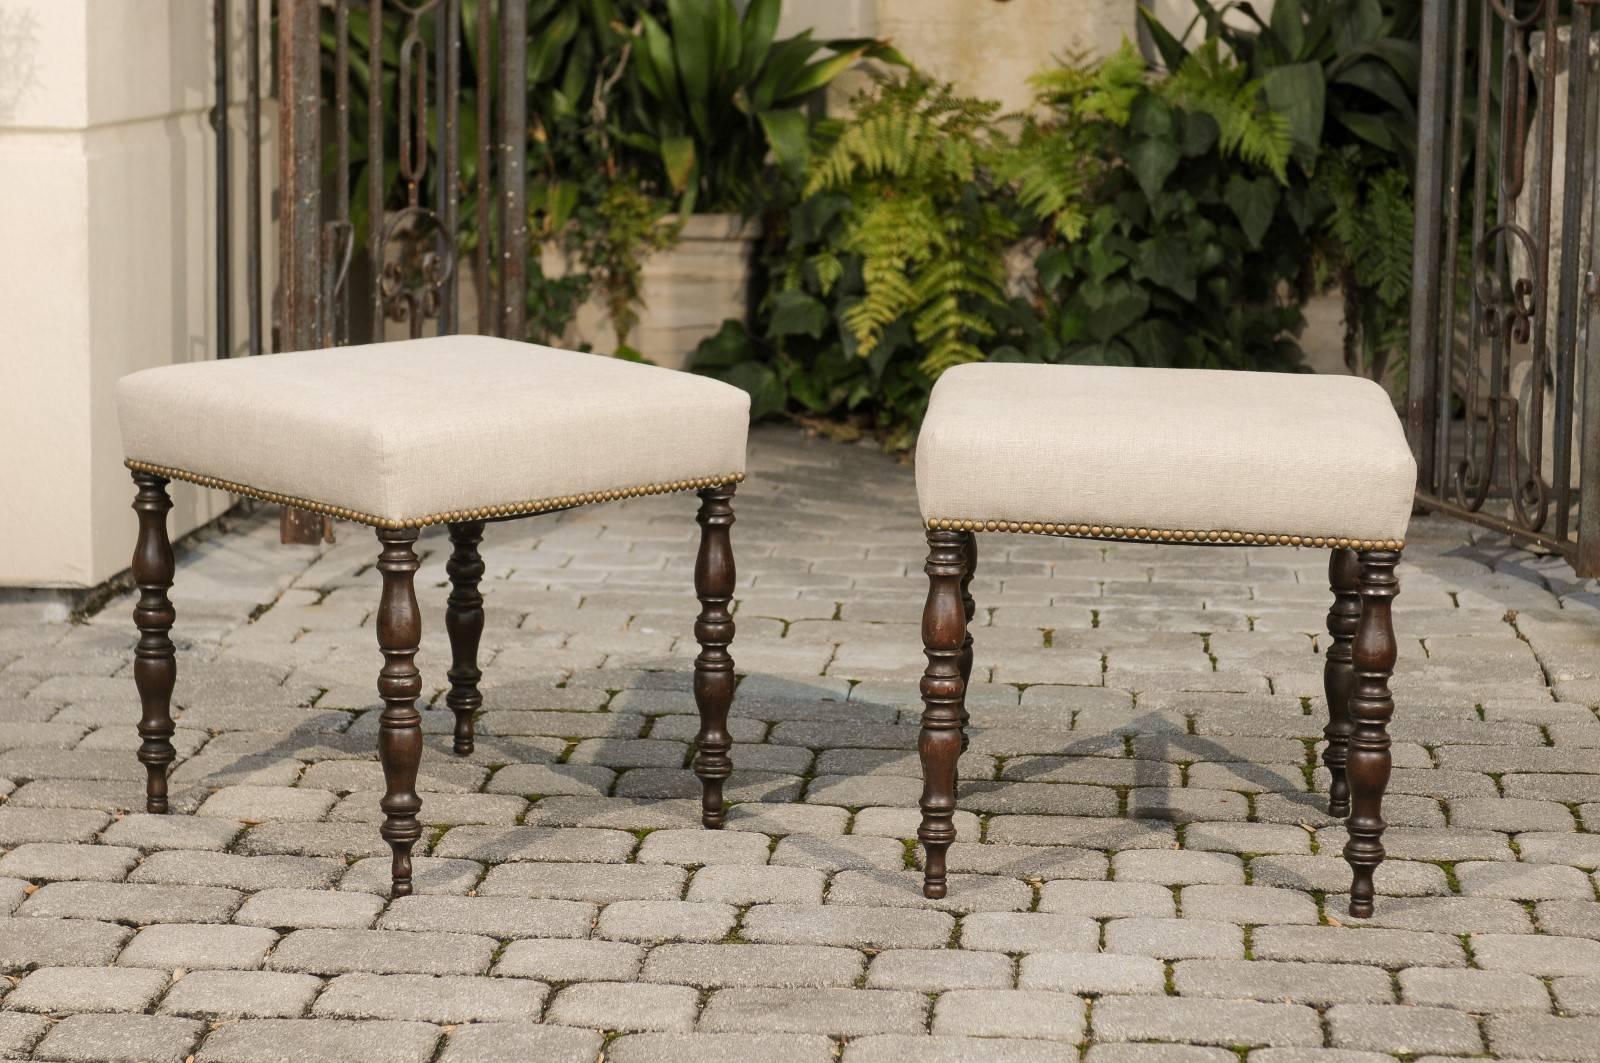 A pair of English, late 19th century walnut stools with turned legs and upholstered seats with brass nailhead trim. Each of this pair of walnut stools features a seat newly recovered in a simple linen fabric with nailhead trim. The ensemble is